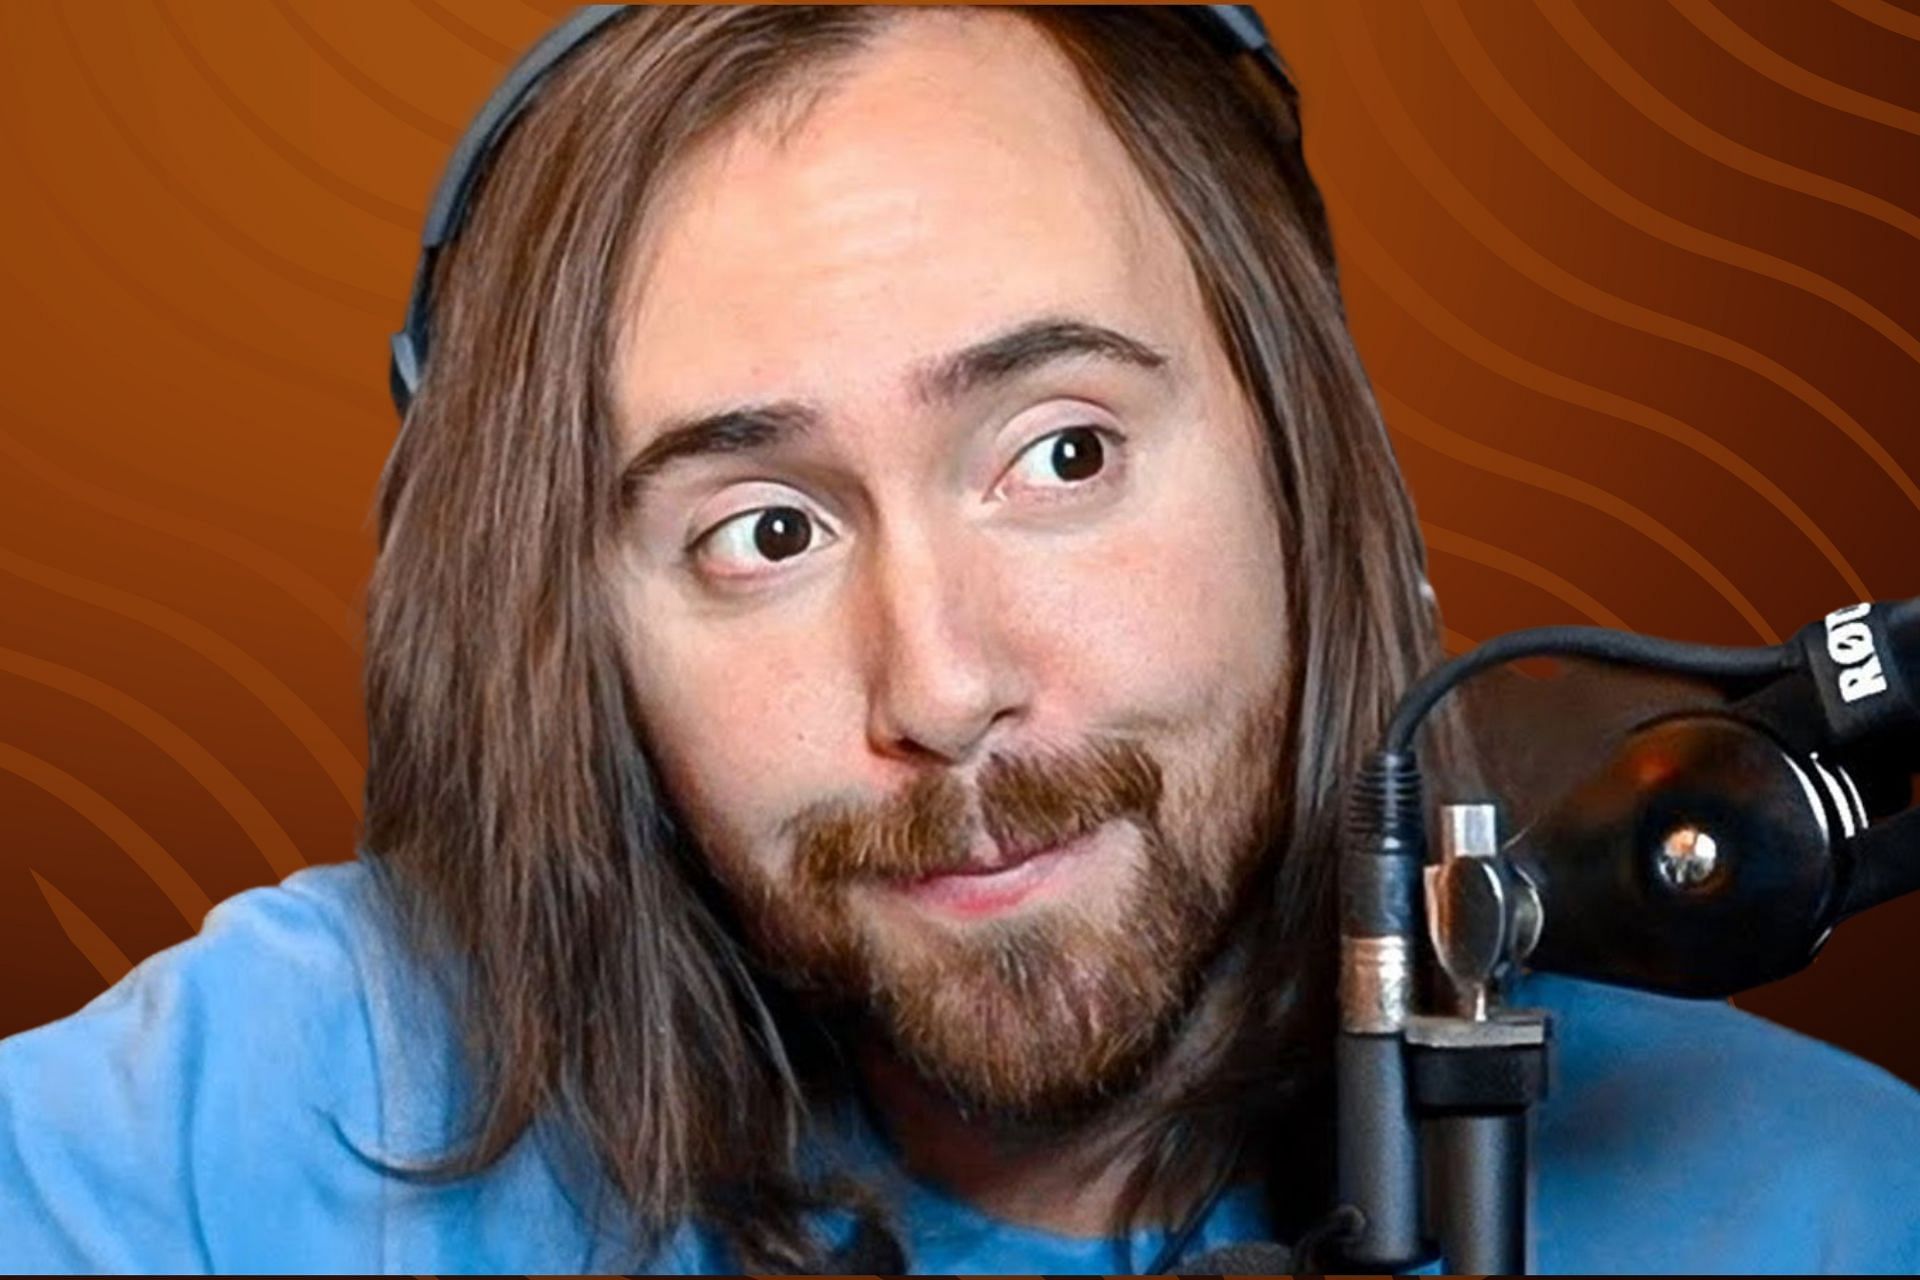 Asmongold plans to milk the Tate brothers for content, should there be a trial.